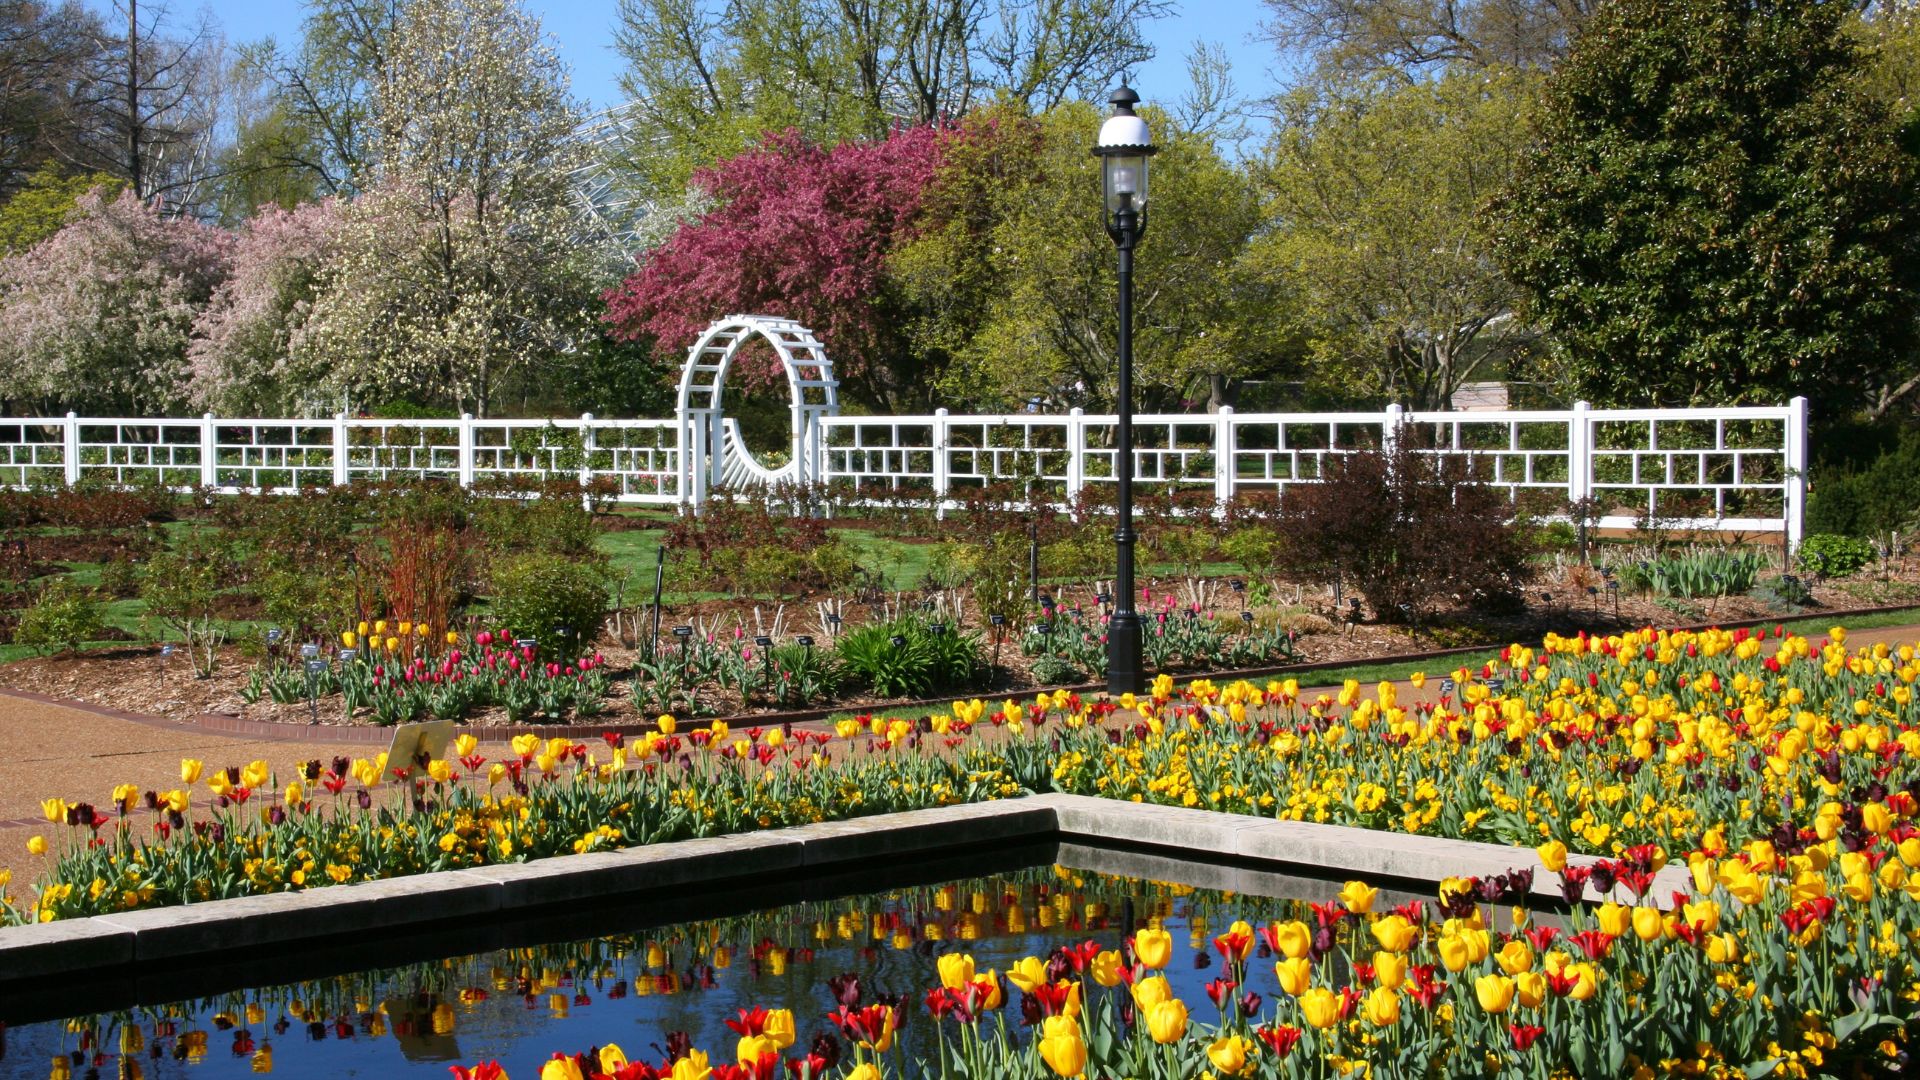 Red and yellow tulips surround a small reflection pond. A white fence and arbor beyond contrast the flowering trees at the Botanical Garden in St. Louis.